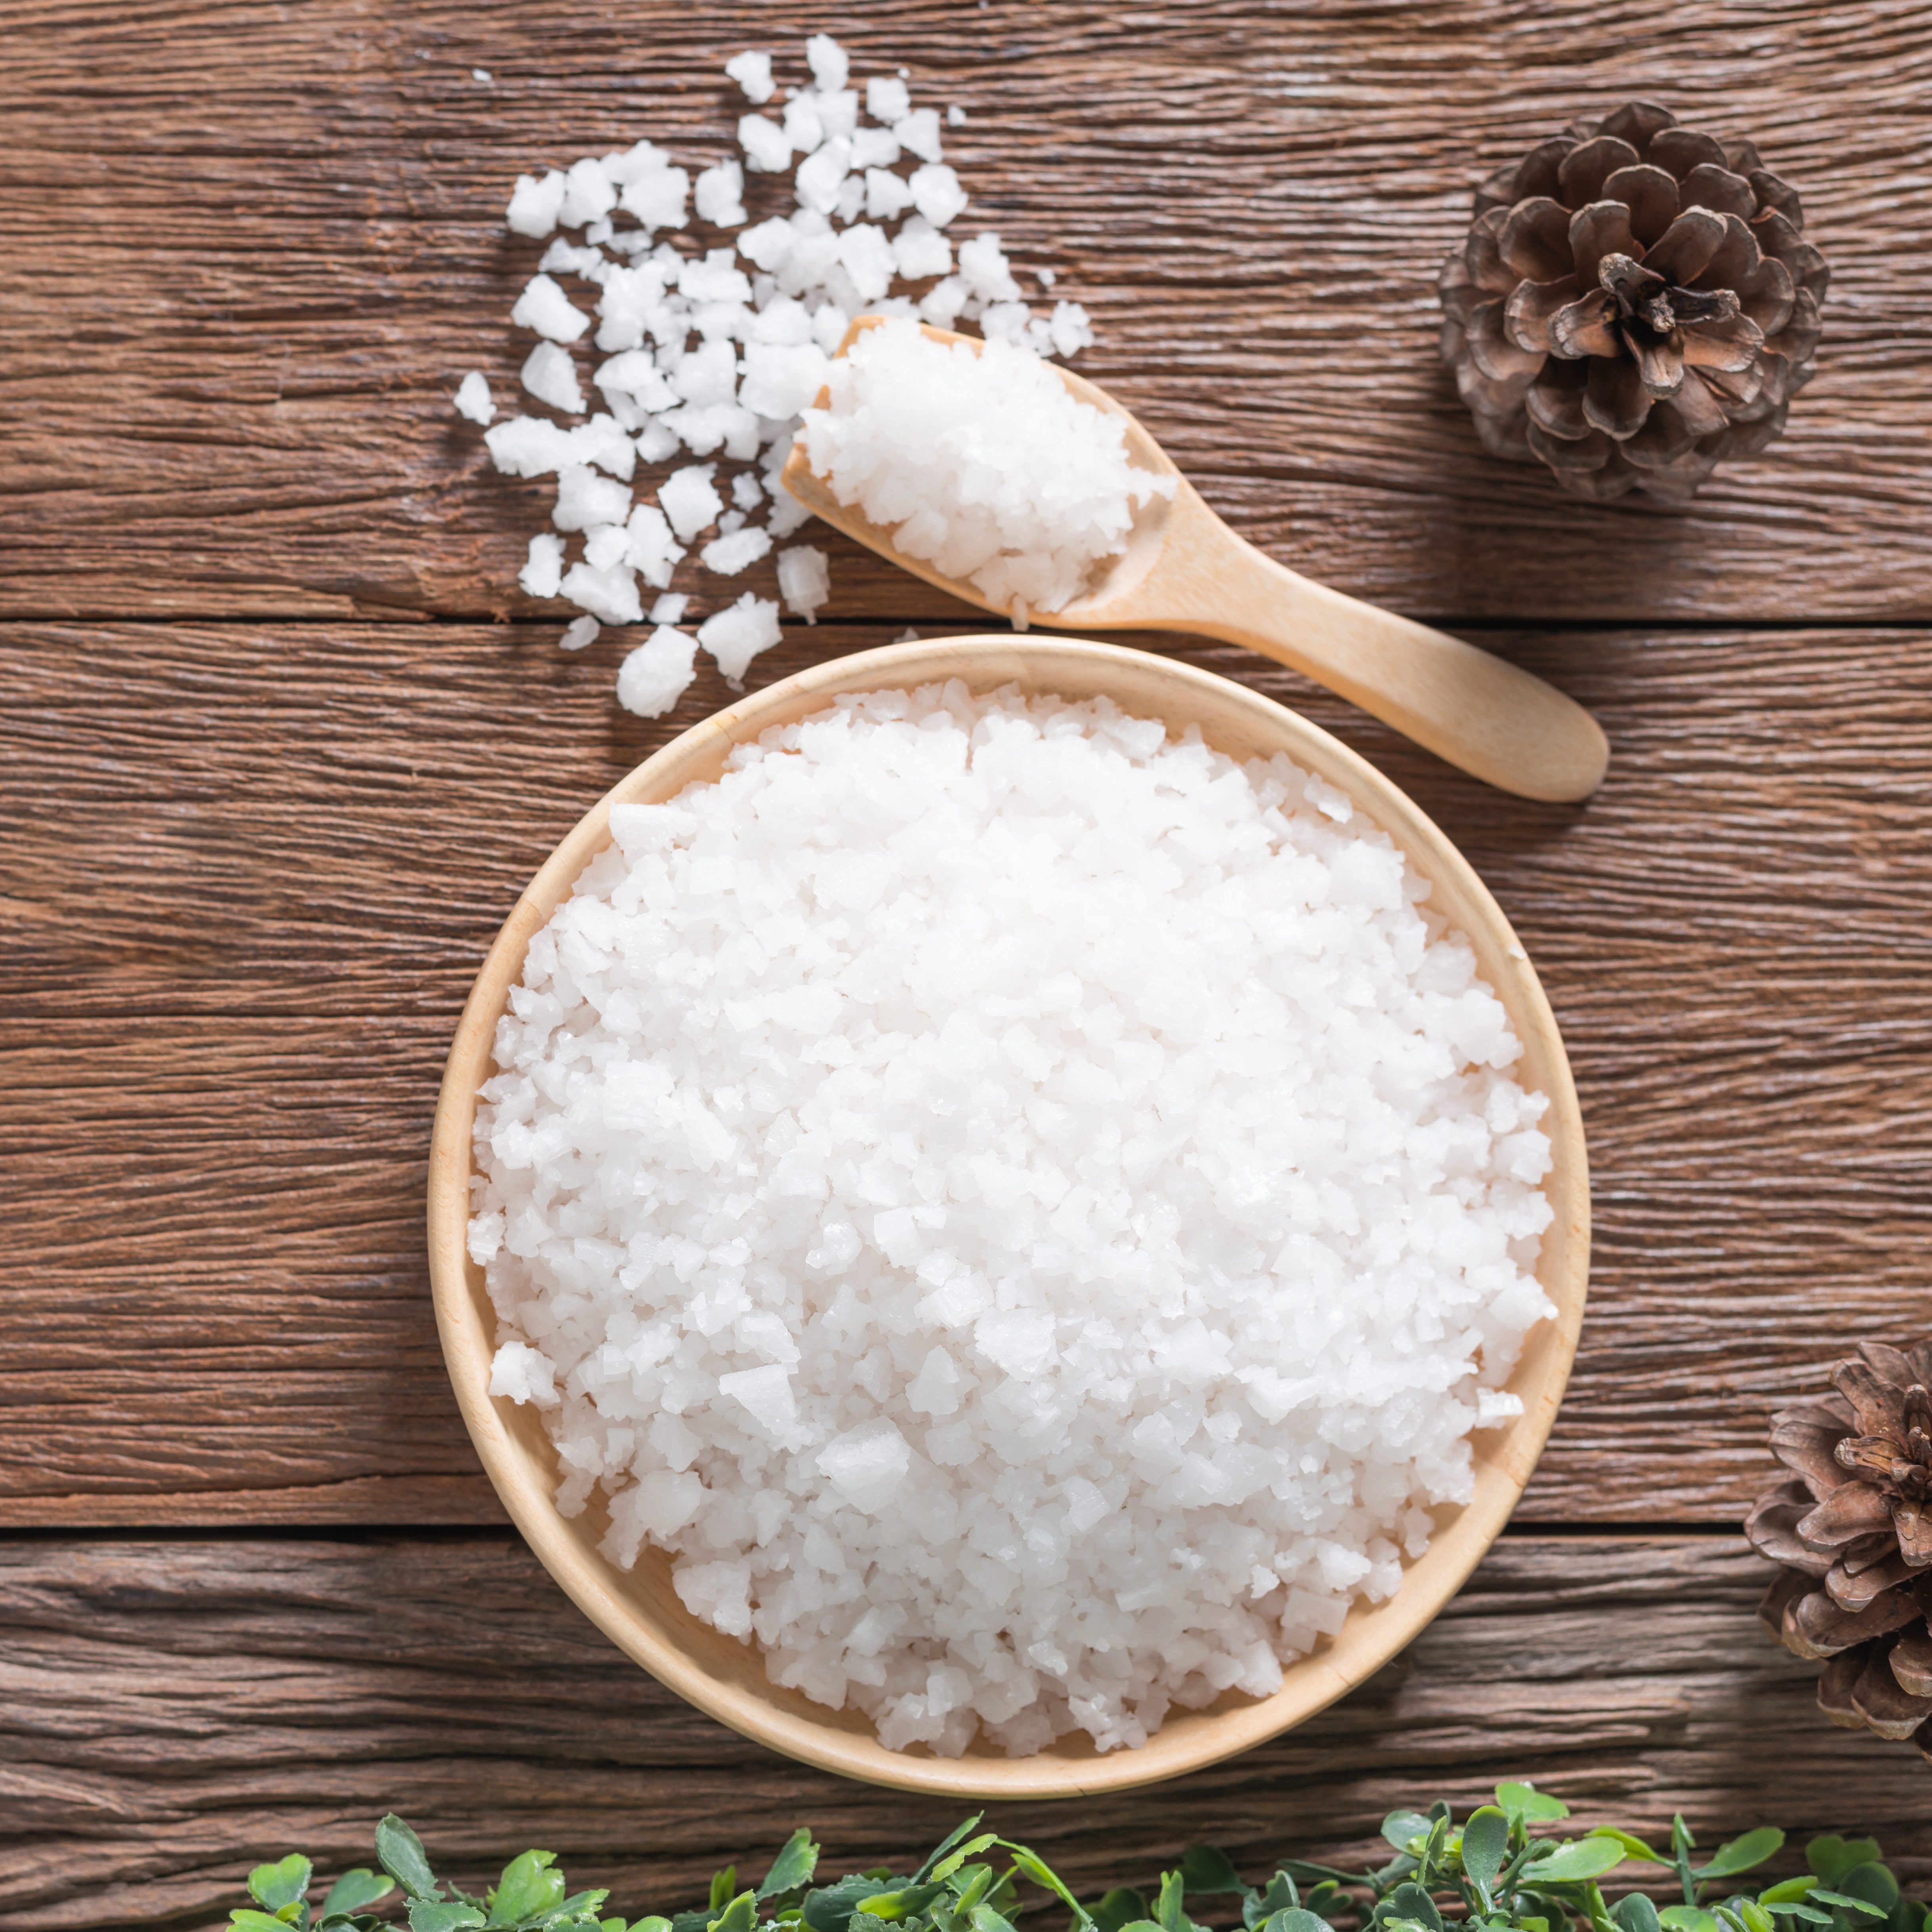 9 Surprising Uses for Epsom Salts You've Probably Never Thought Of